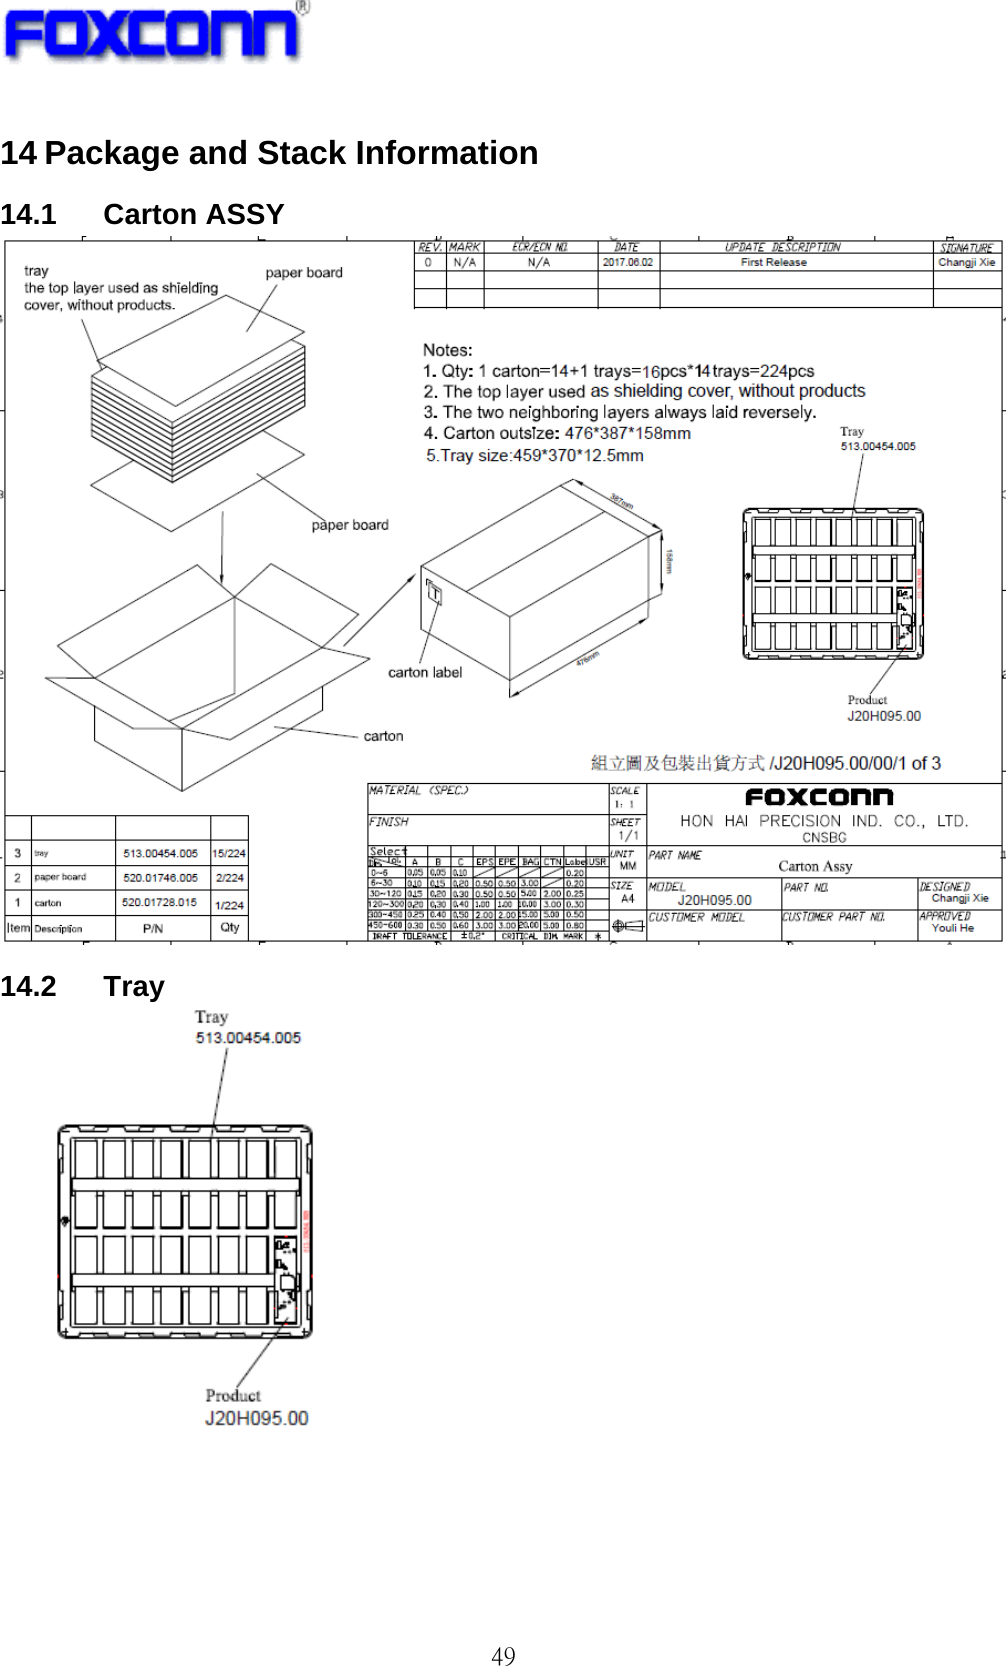   49 14 Package and Stack Information 14.1  Carton ASSY  14.2  Tray  